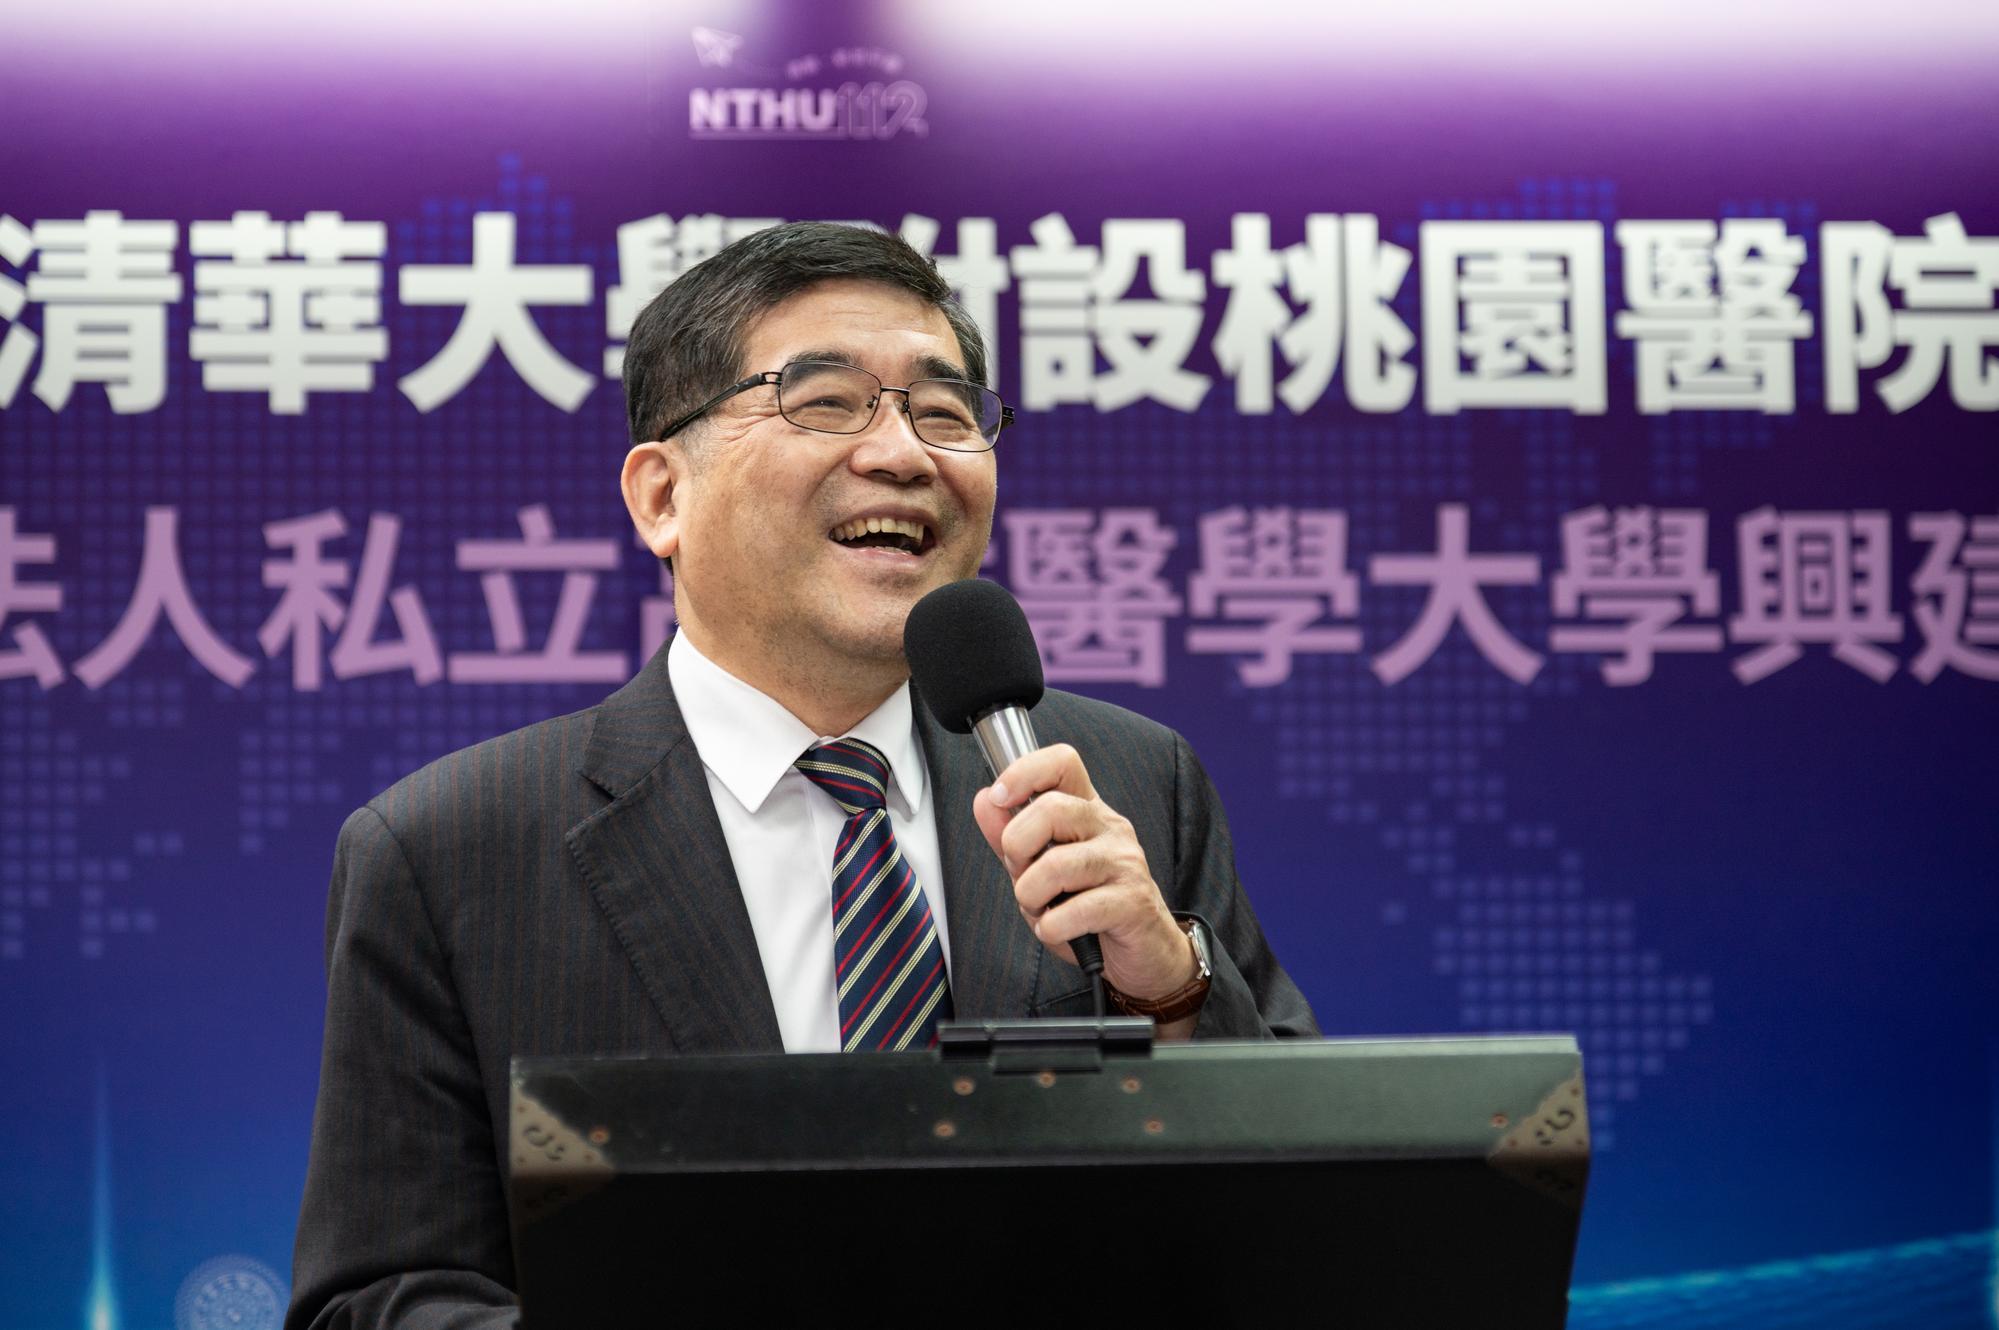 KMU President Chun-yuh Yang (楊俊毓) stated that KMU will build and operate the NTHU Hospital in a sustainable way.